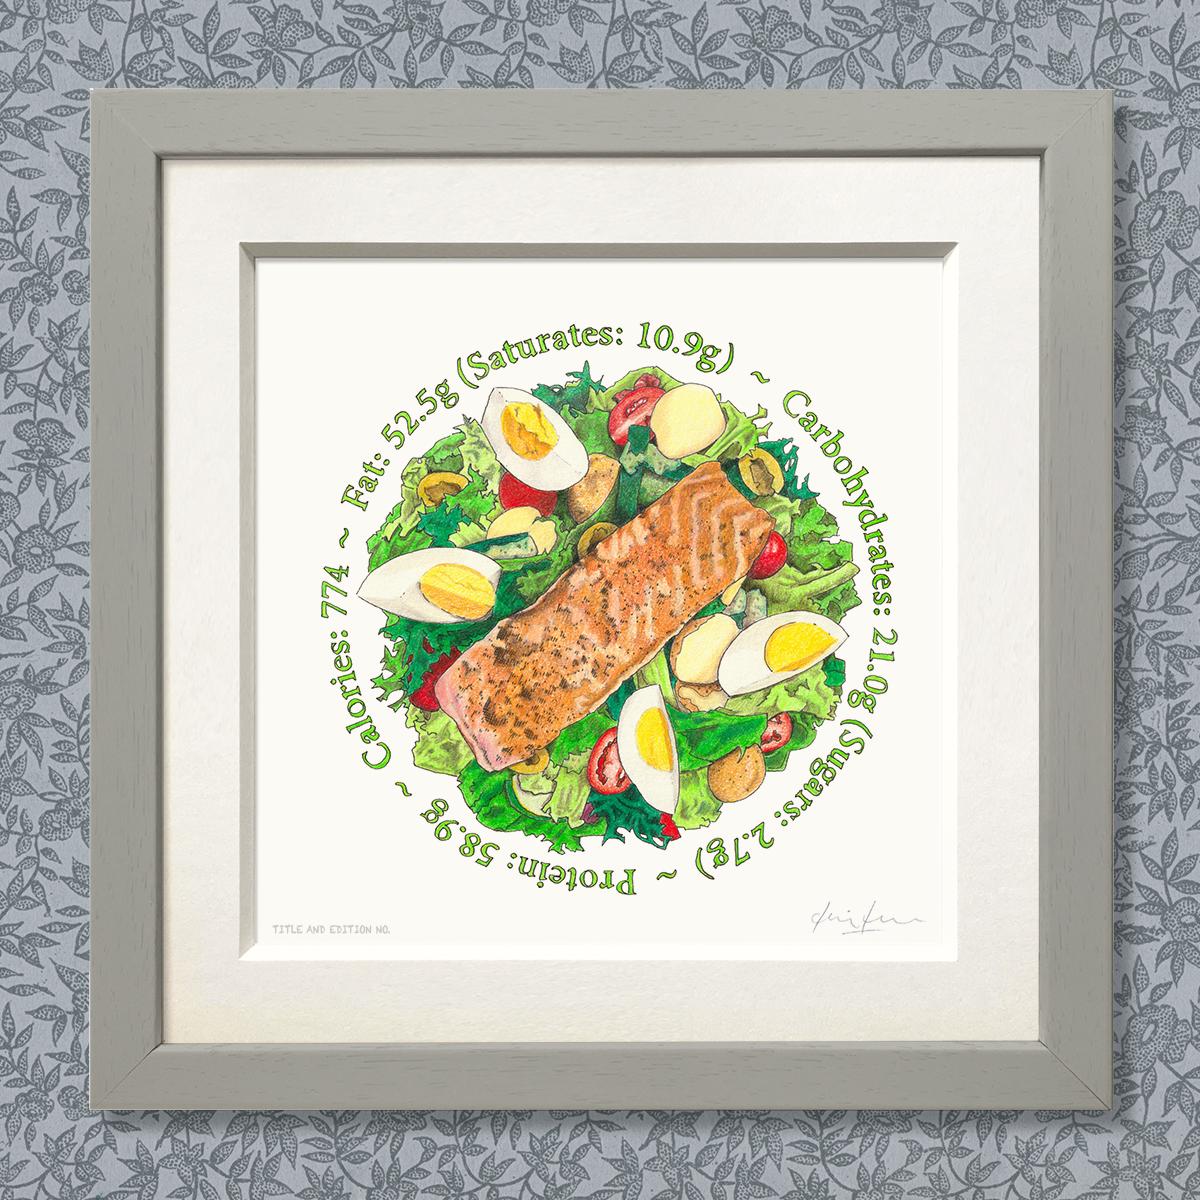 Limited edition print of coloured drawing of a plate of salmon salad, in a grey frame.